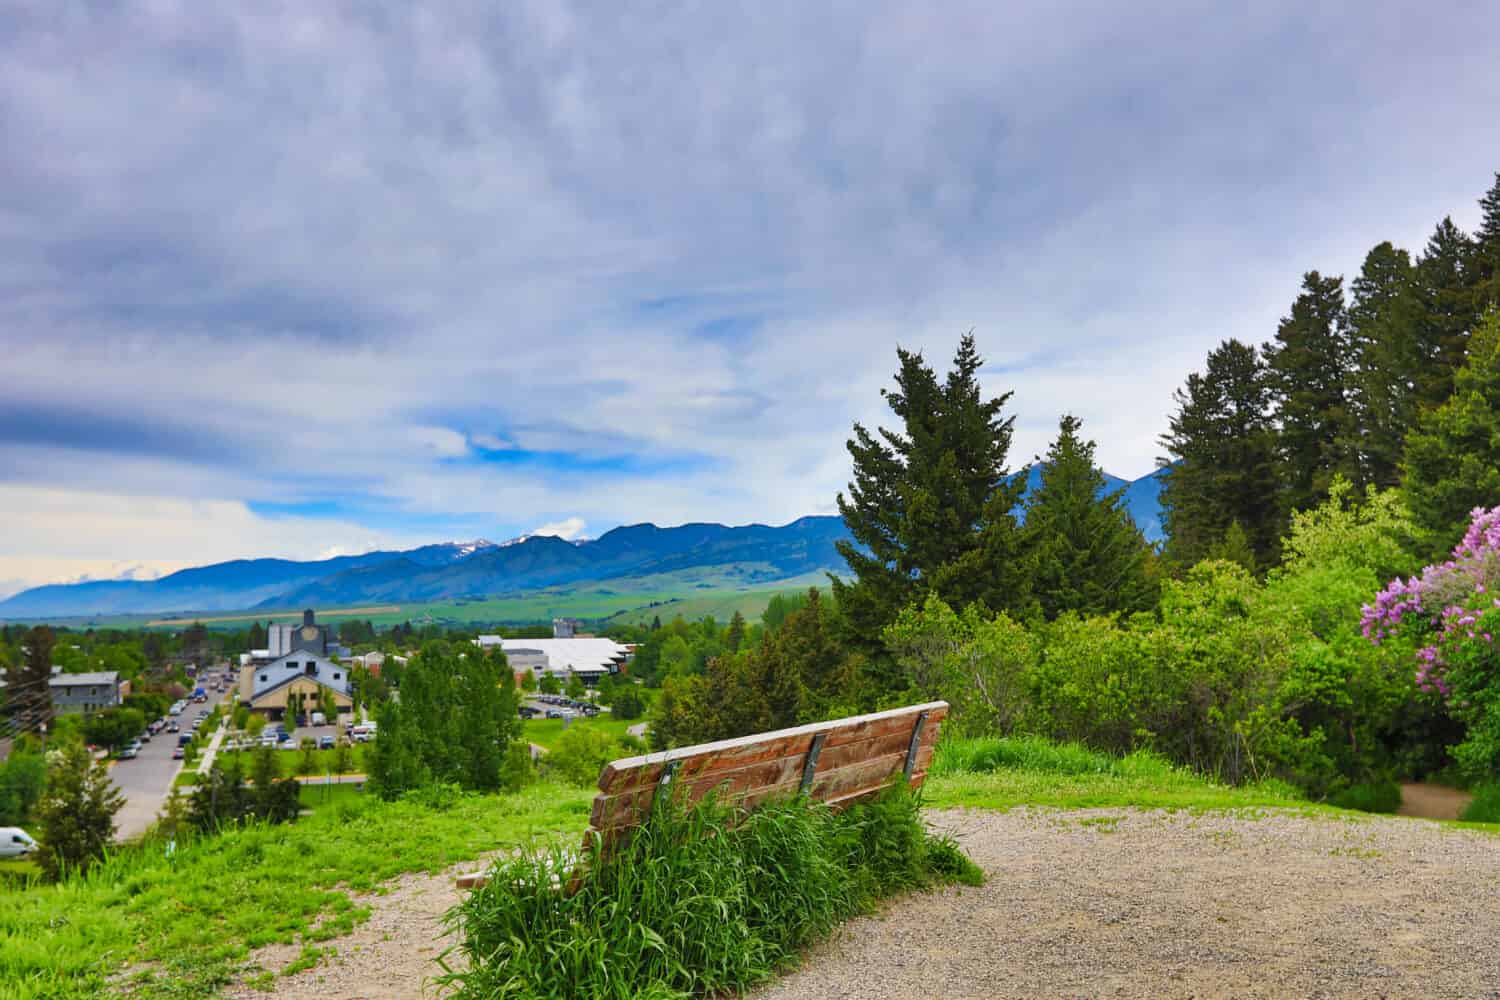 The hills of Bozeman, Montana are full of paths for walking, running and other fitness activities.  There are picturesque views of the city and the mountains.  There are benches to enjoy the view.